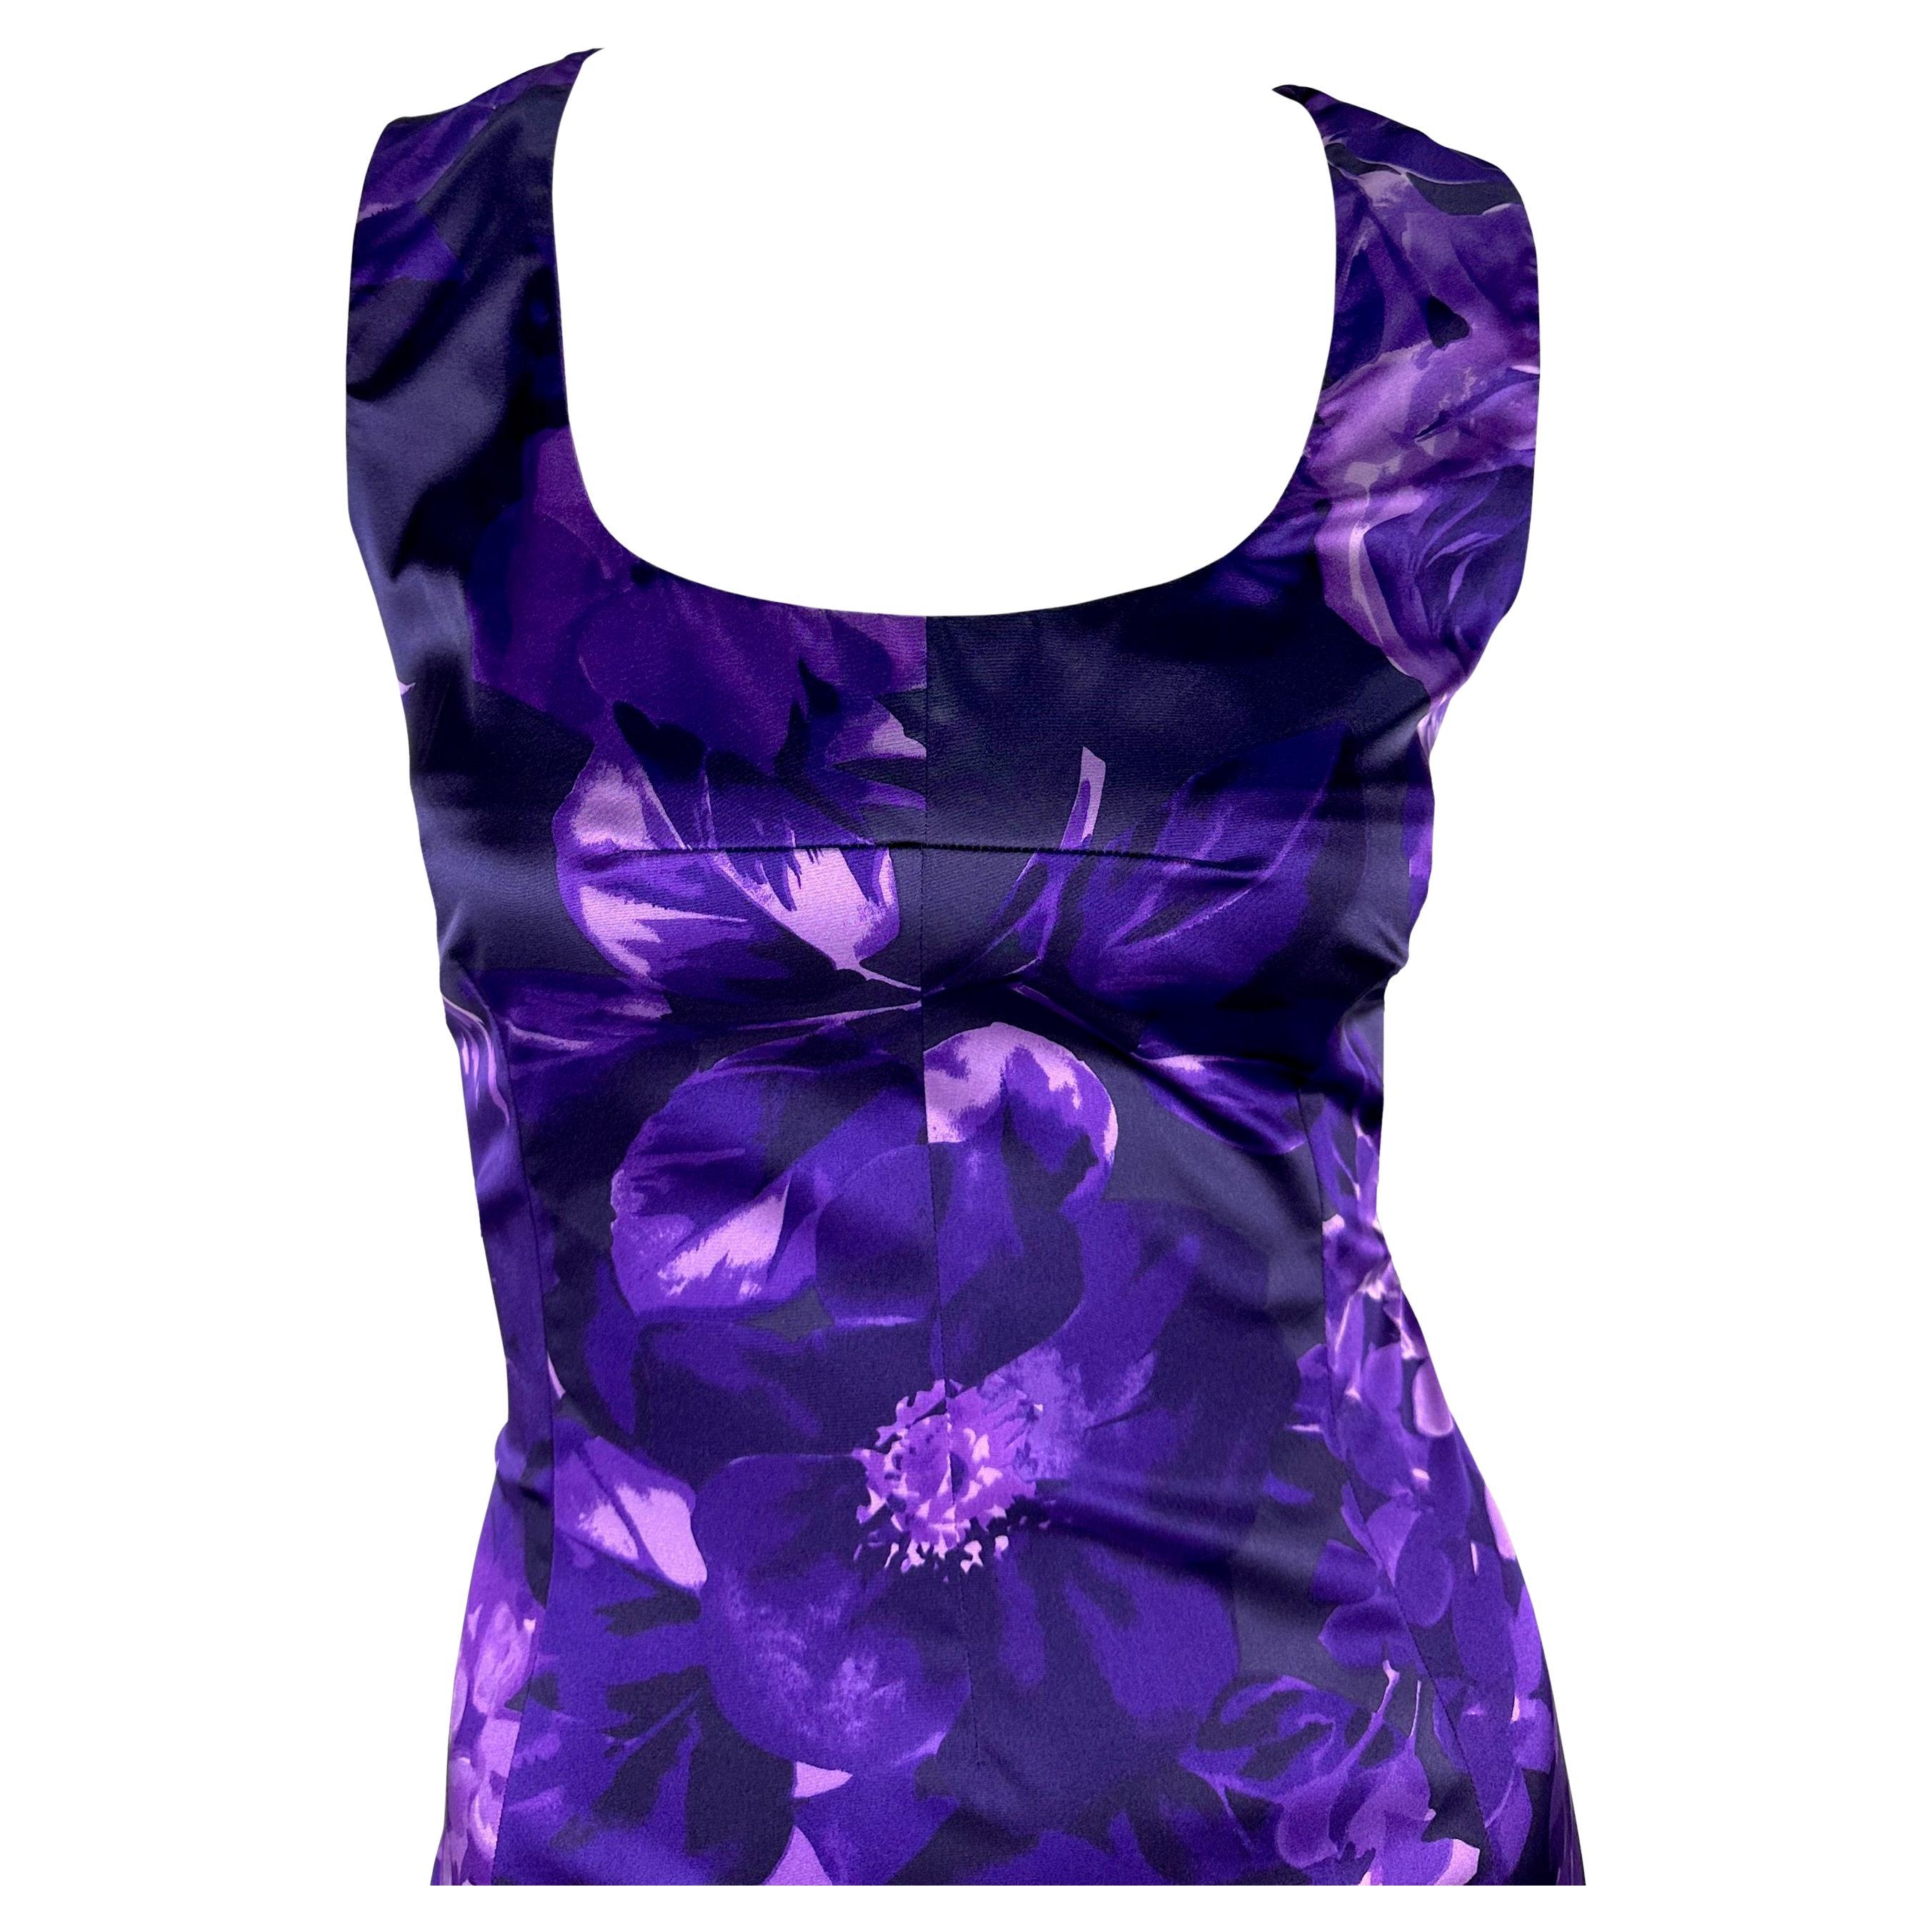 This knee-length dress from Dolce & Gabbana is covered in a vibrant floral pattern with purple hues, beautifully contouring the body. With its scoop neckline and wide shoulder straps, this satiny dress makes a bold statement in any wardrobe.